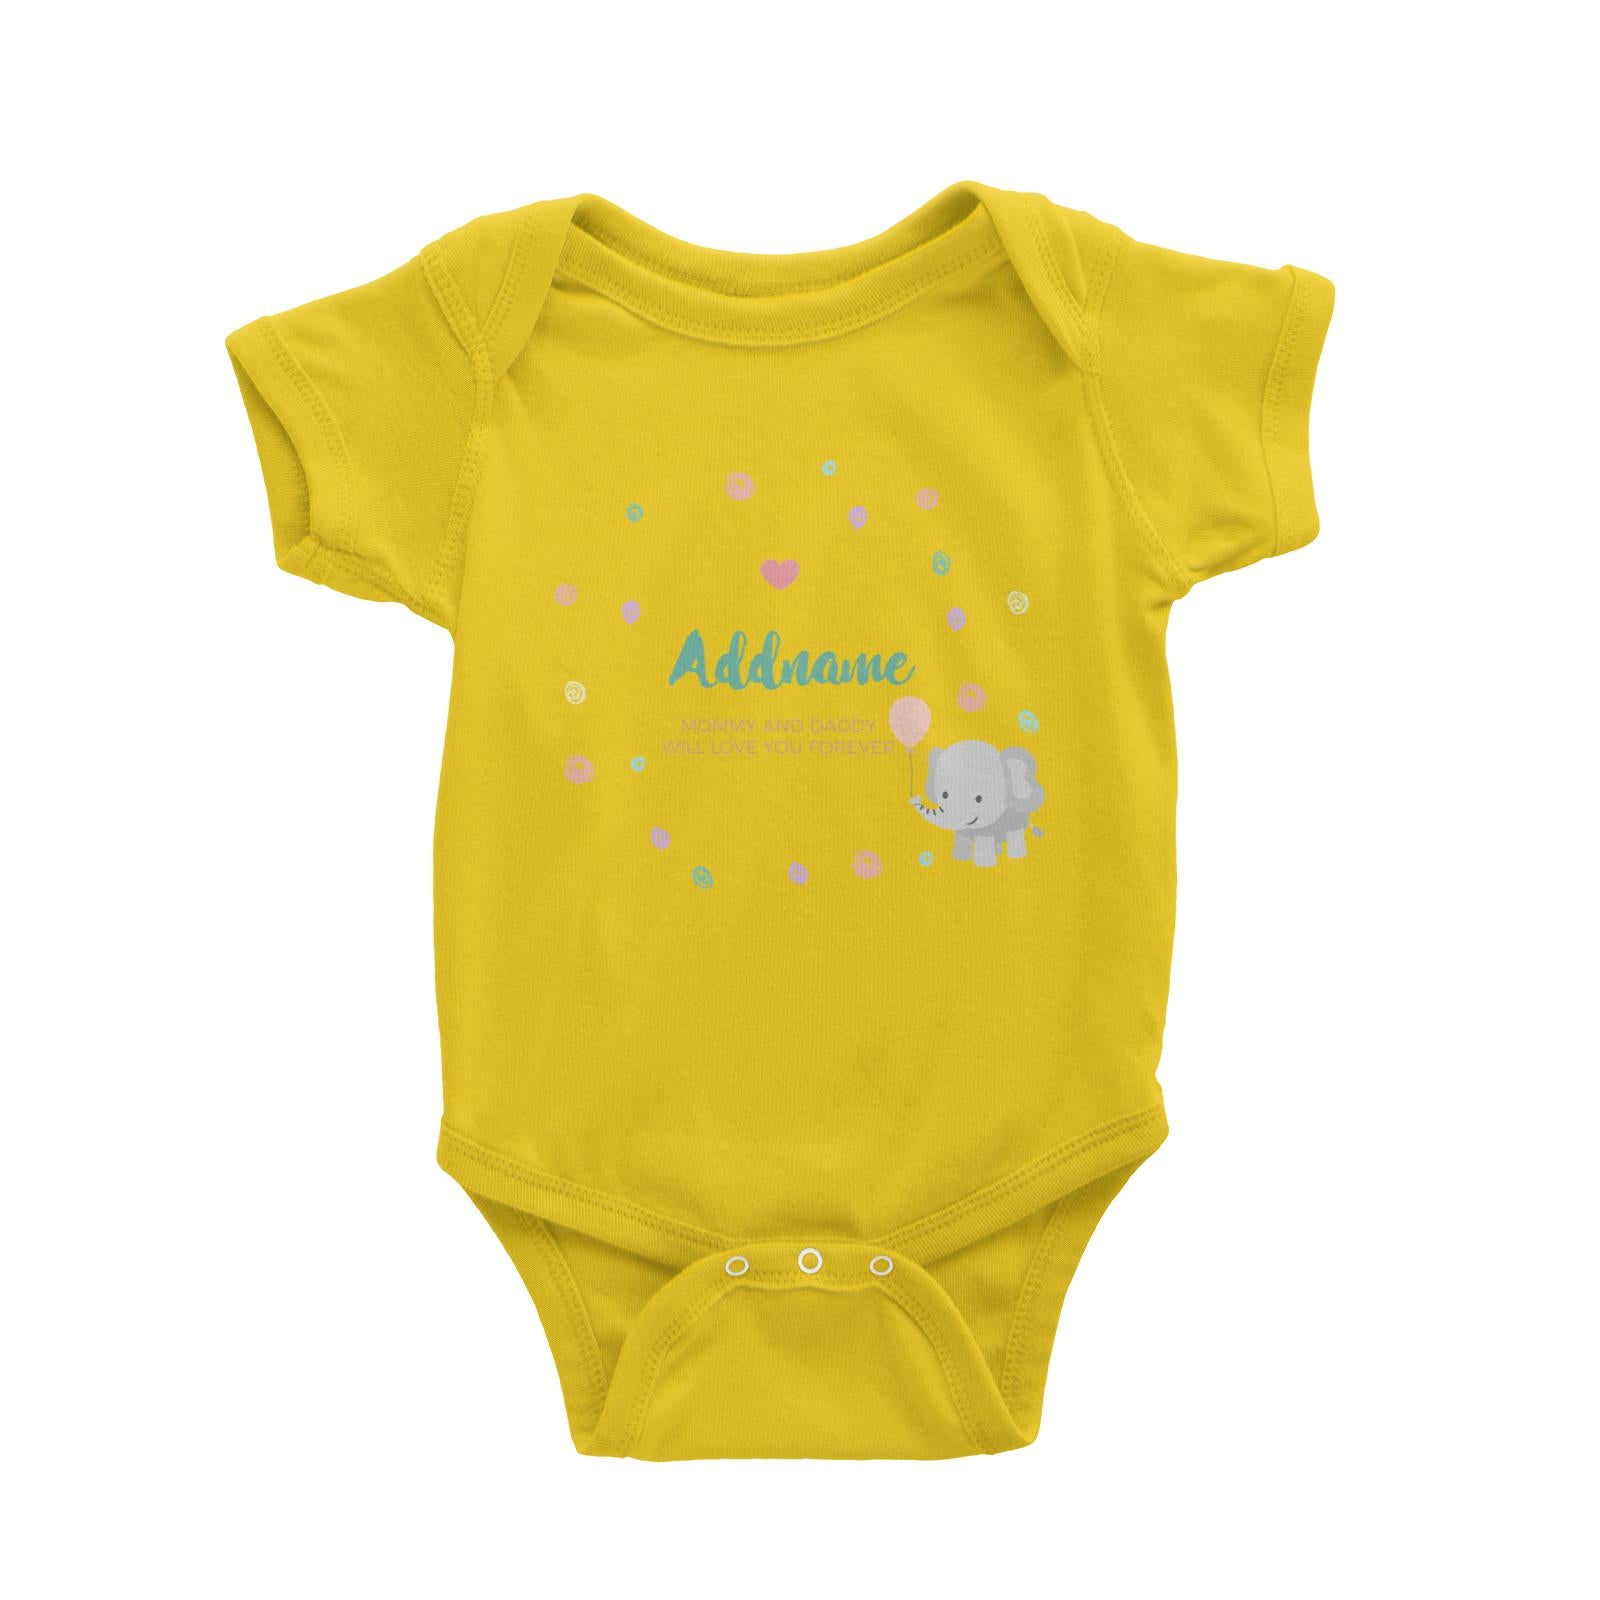 Cute Elephant with Balloon and Colourful Doodles Personalizable with Name and Text Baby Romper